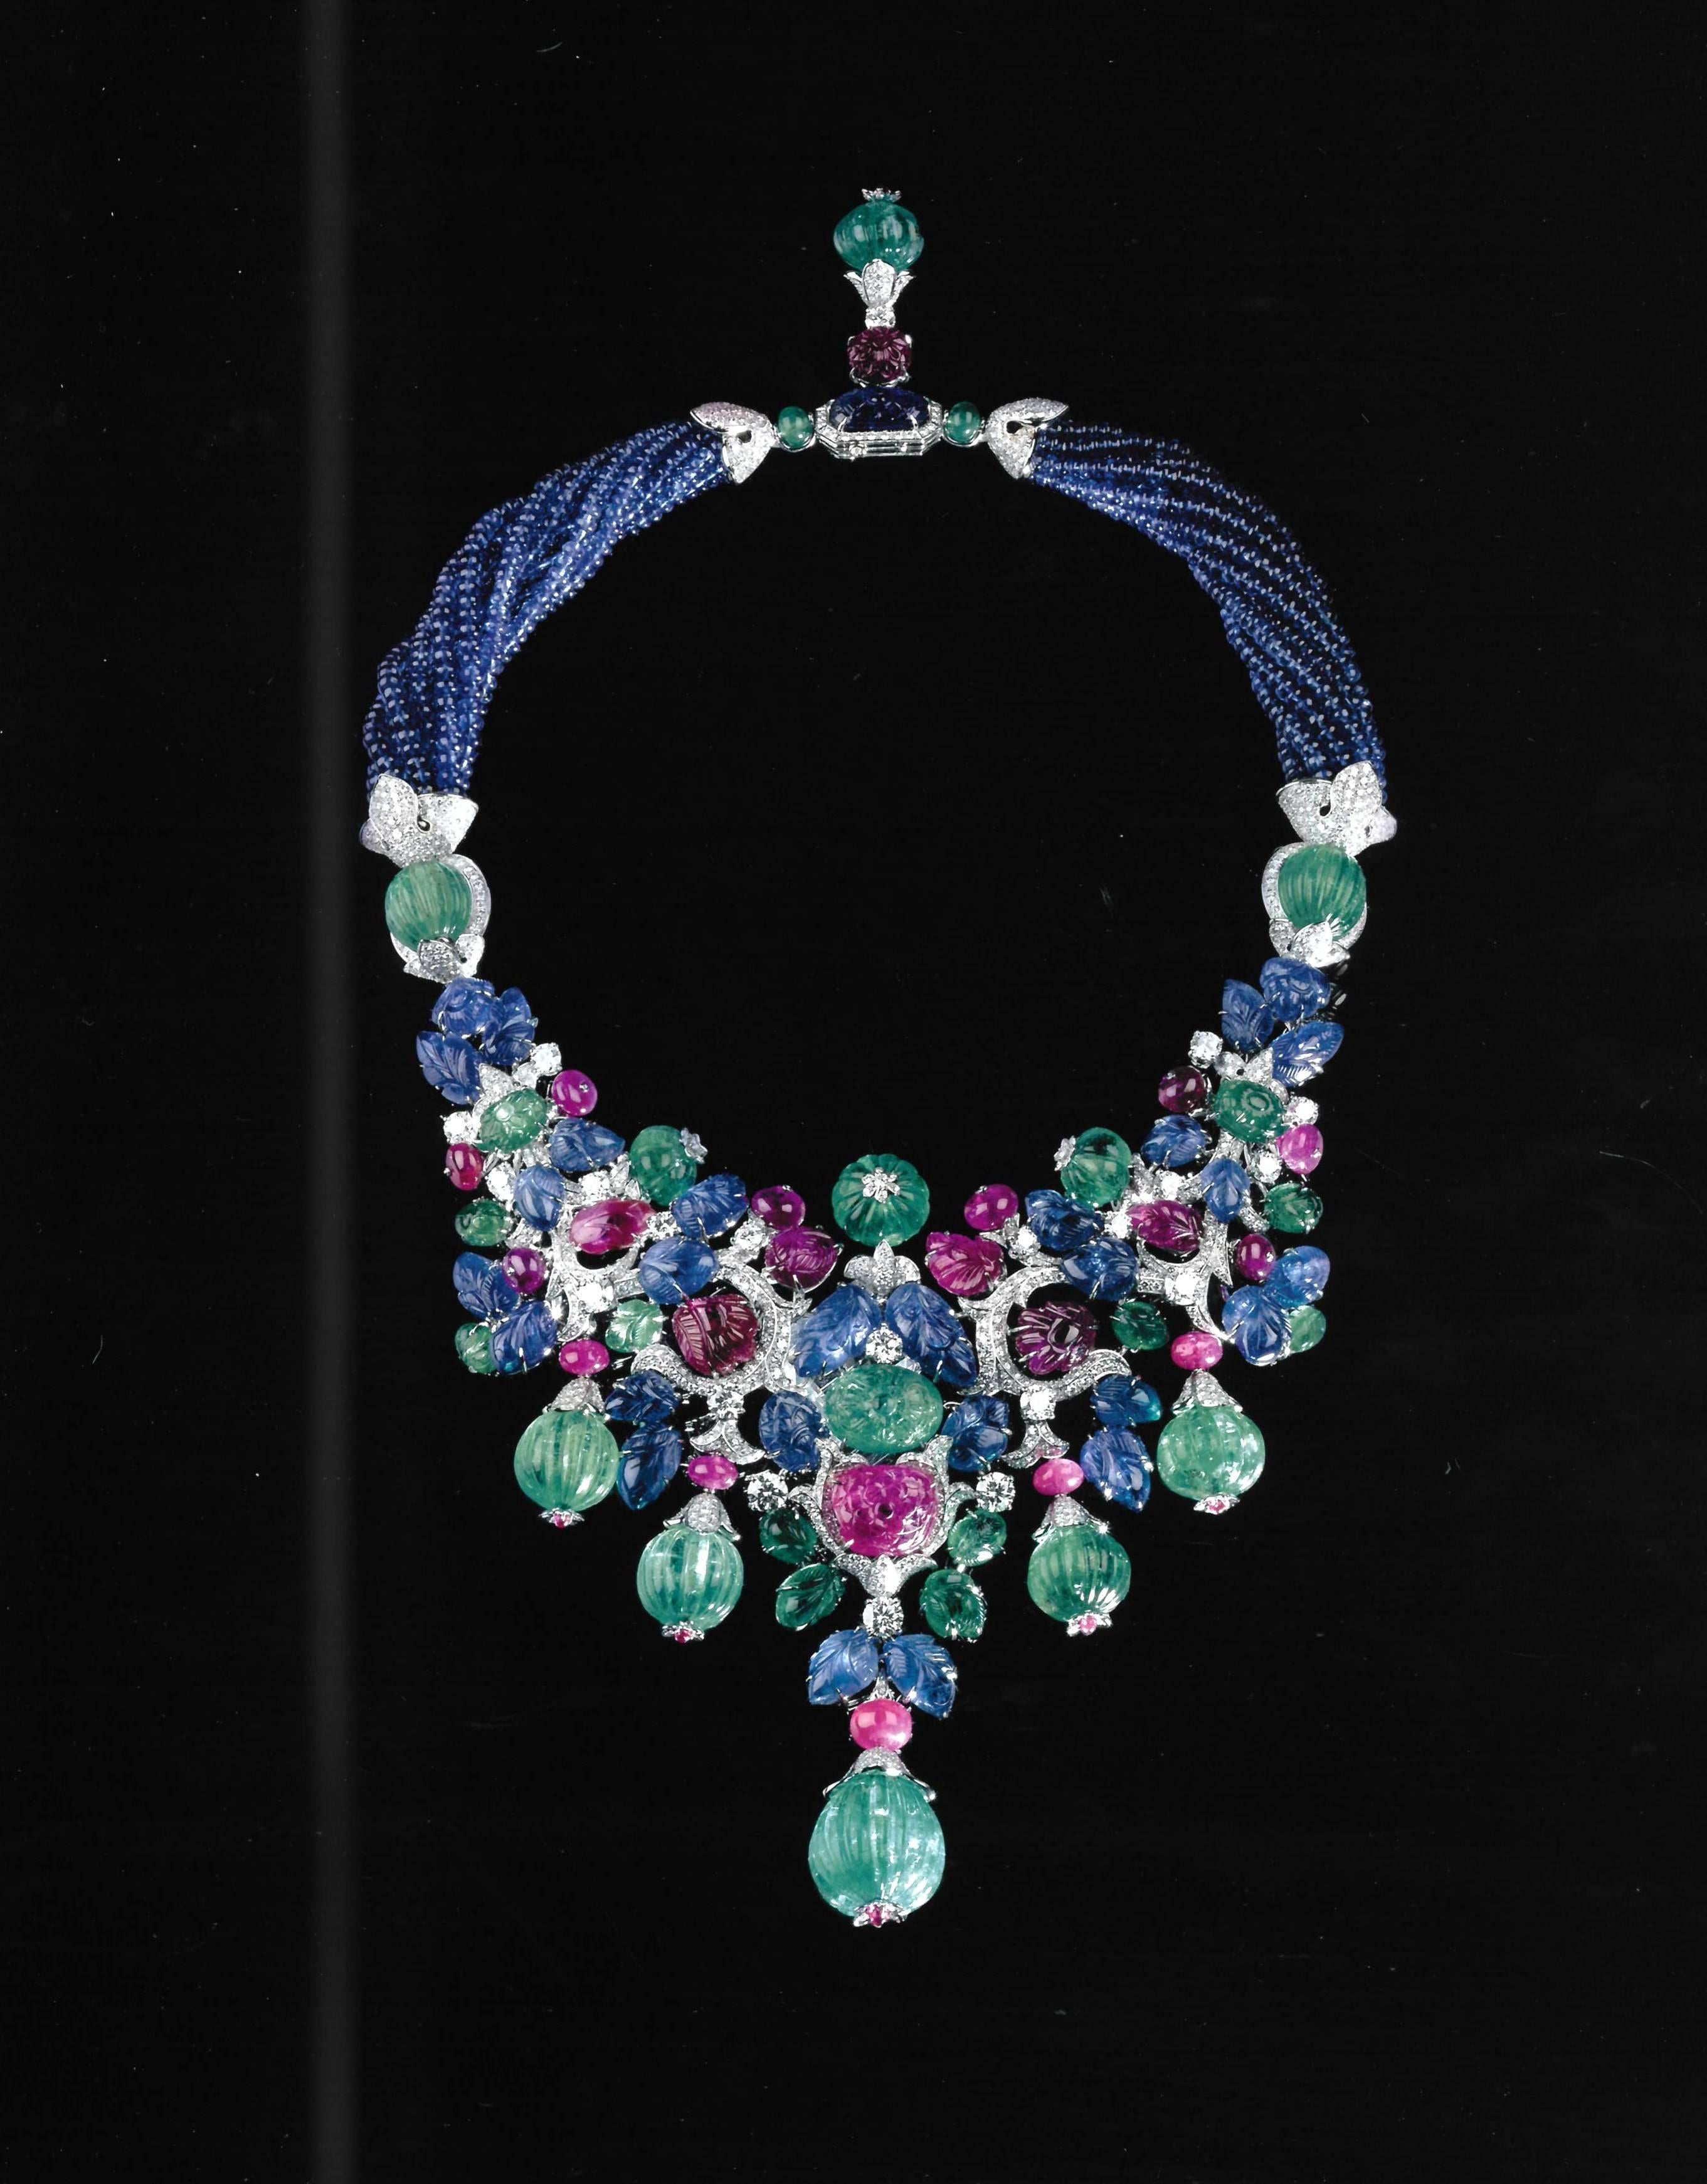 Women's or Men's High Jewelry by Cartier: Contemporary Creations (Book)